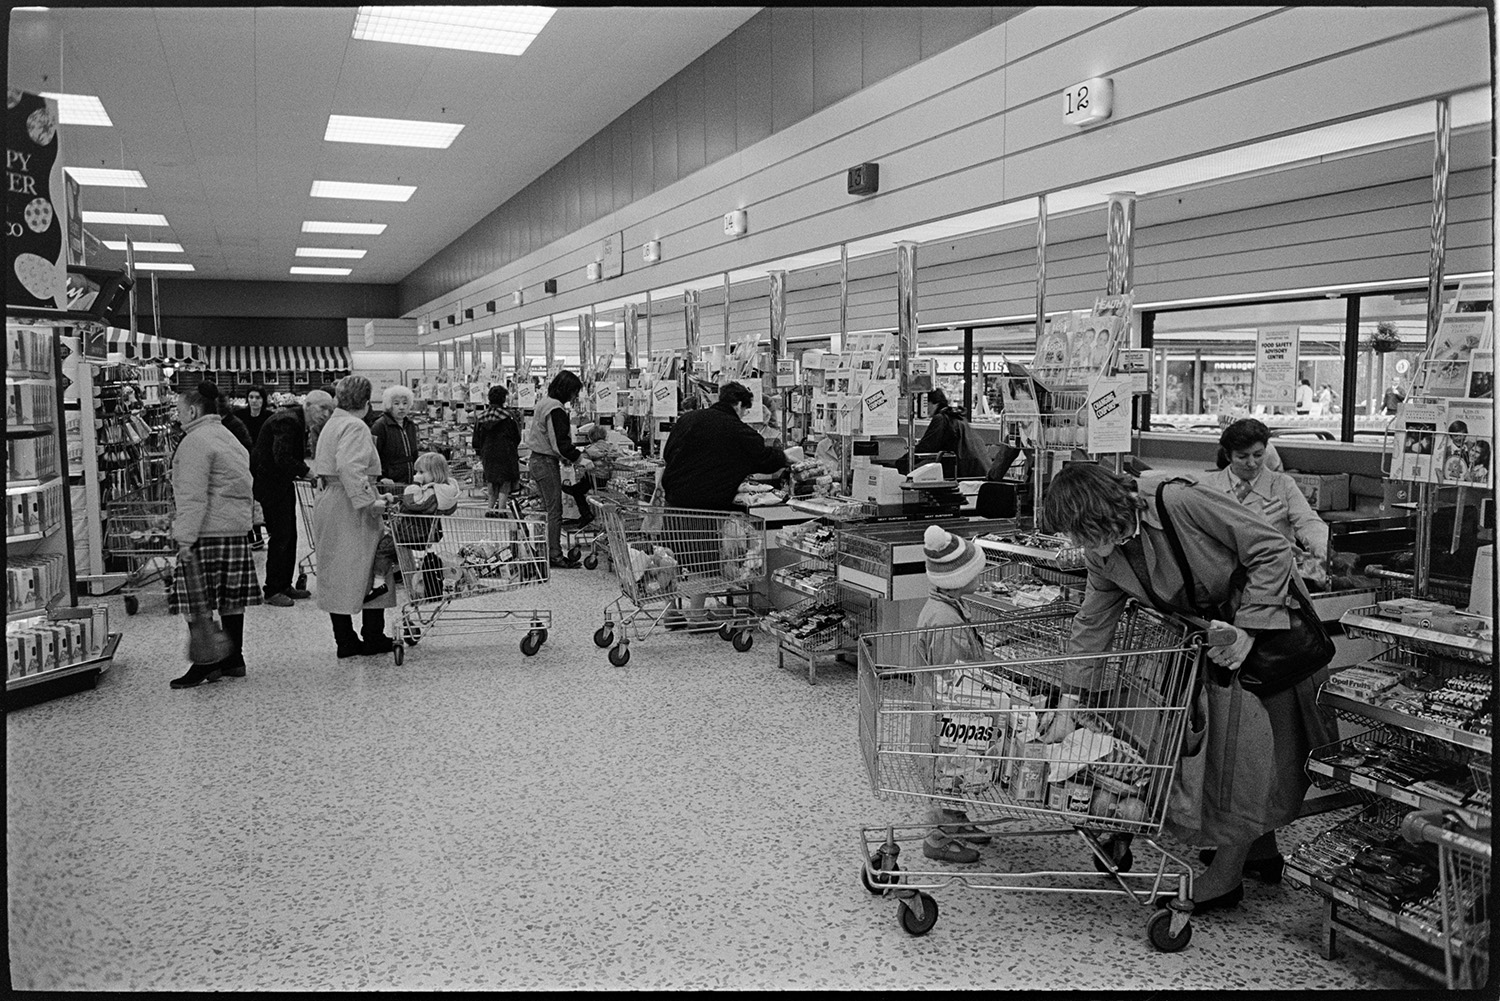 Interior of supermarket with people shopping, delivery lorry being unloaded. 
[People queuing up to buy goods at the checkouts in the Tesco supermarket in Barnstaple. A woman in the foreground is unloading a trolley with a child.]